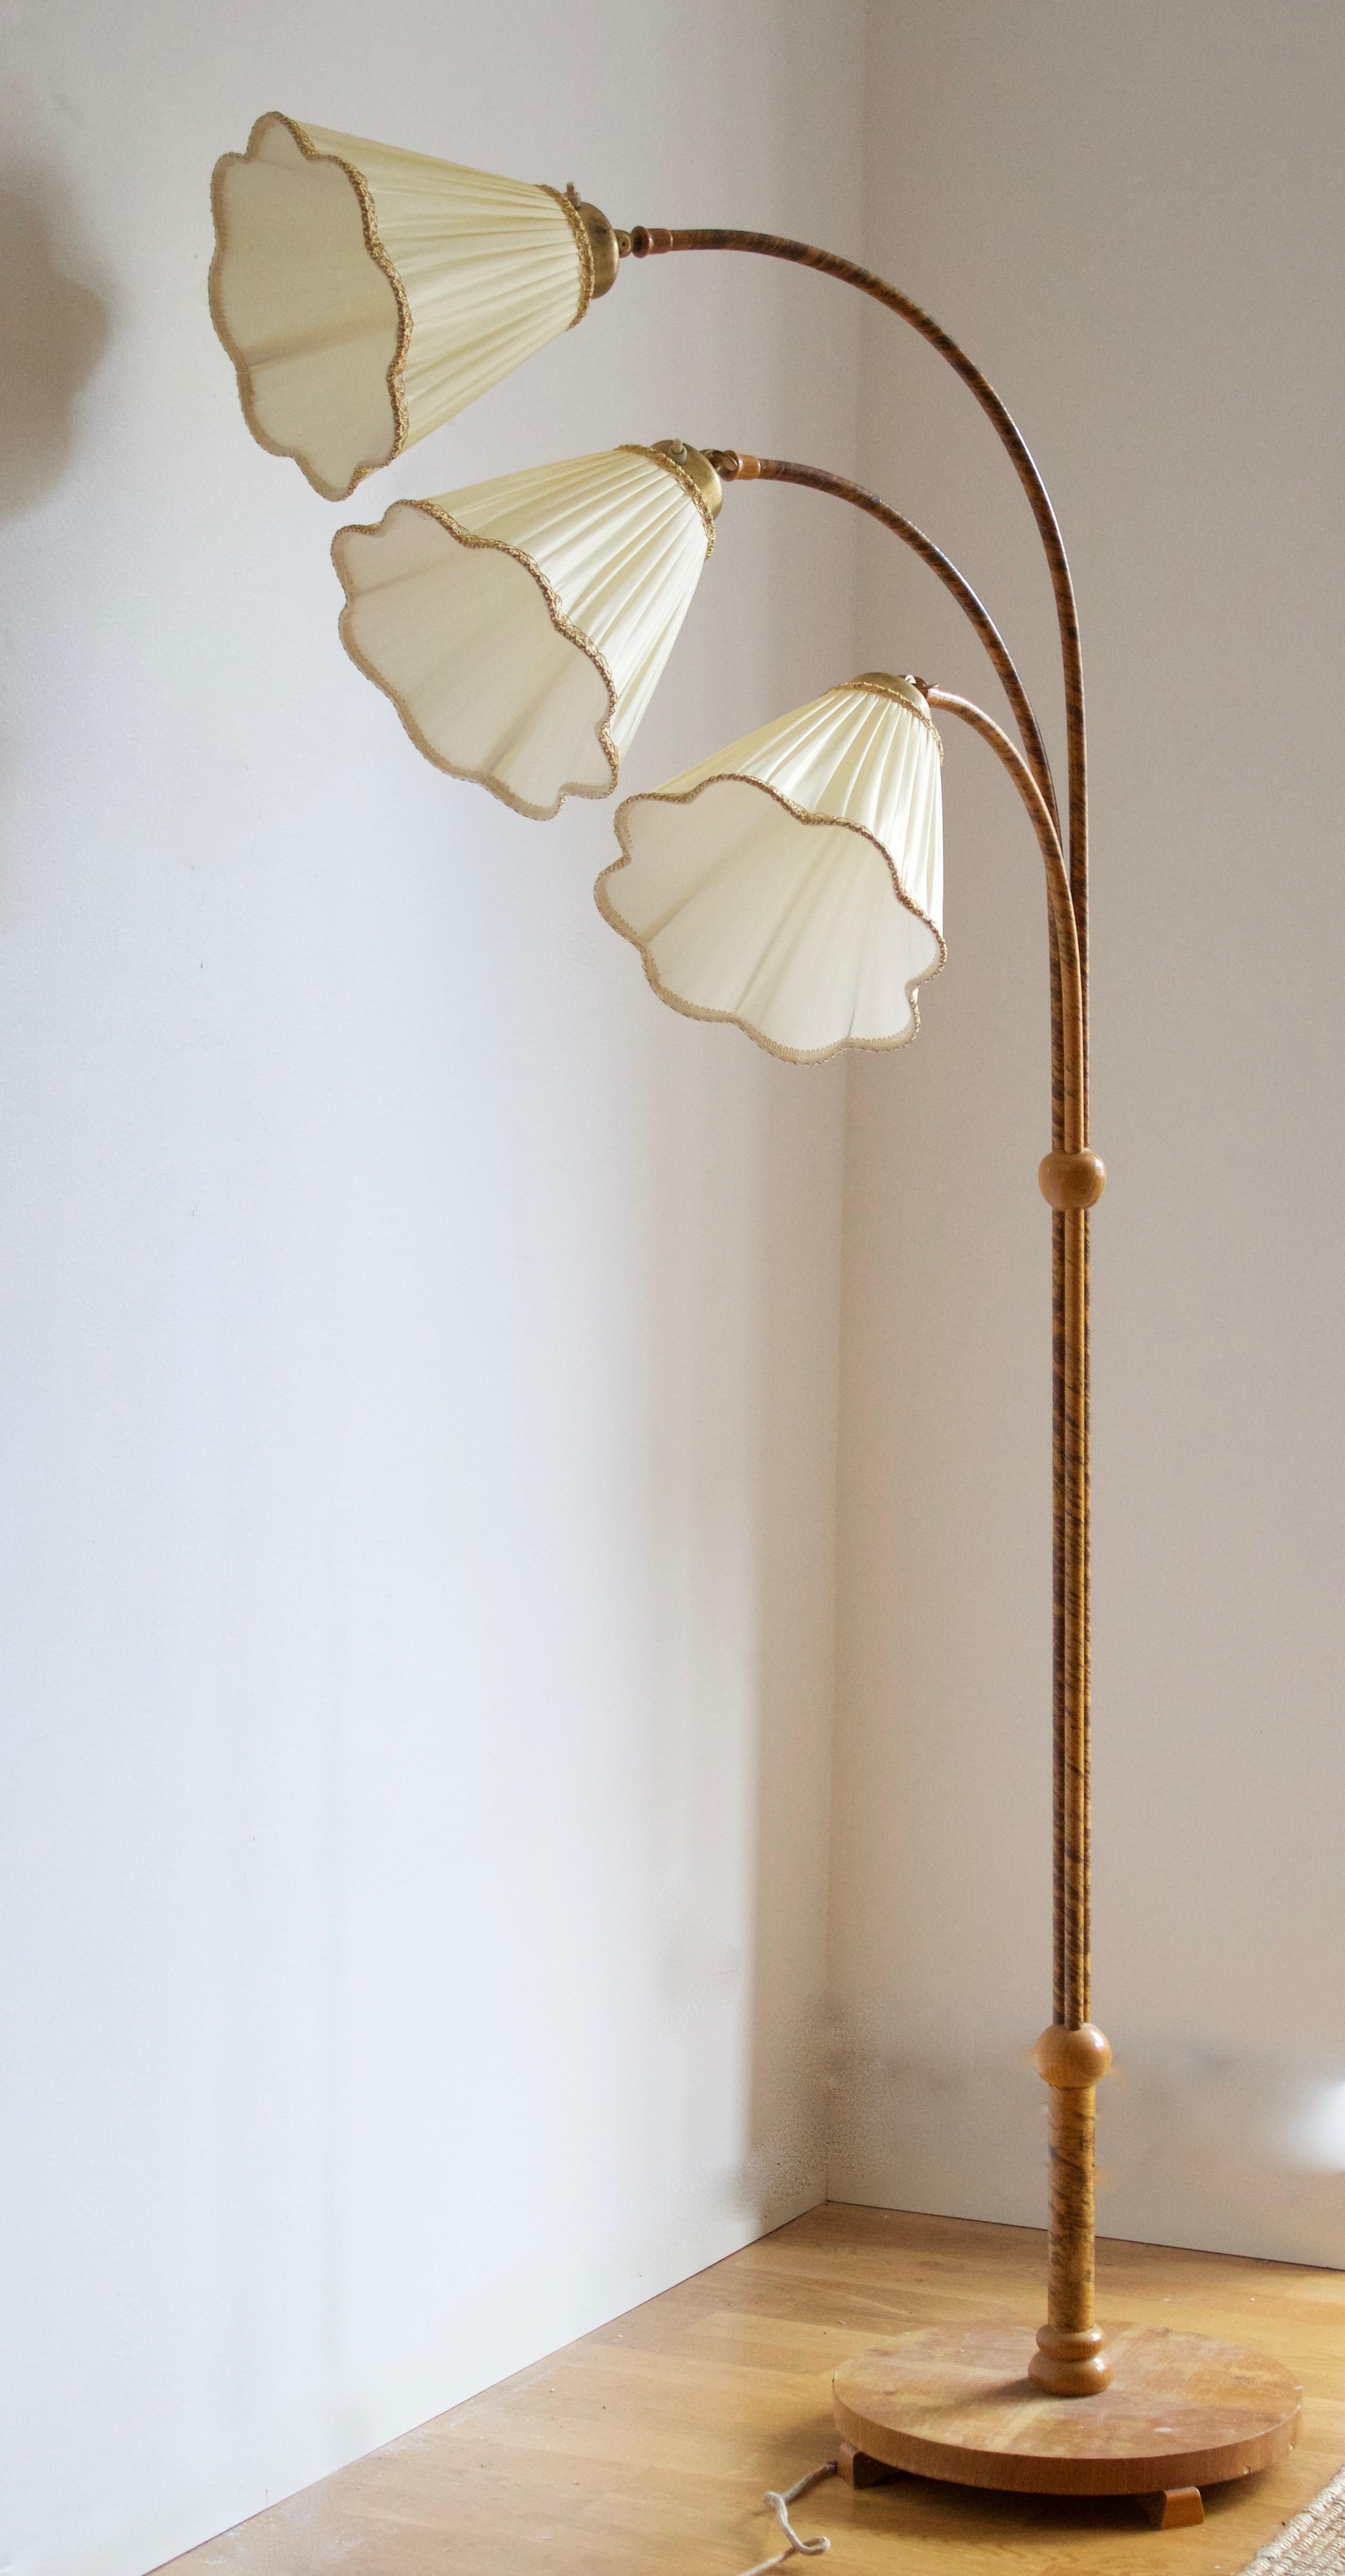 A three-armed floor lamp, designed and produced in Sweden, 1930s-1940s. Features wood, brass, wrapped bark, brand new high-end lampshades. 

Other designers of the period include Jean Royère, Paolo Buffa, Josef Frank, Jacques Adnet, and Paavo